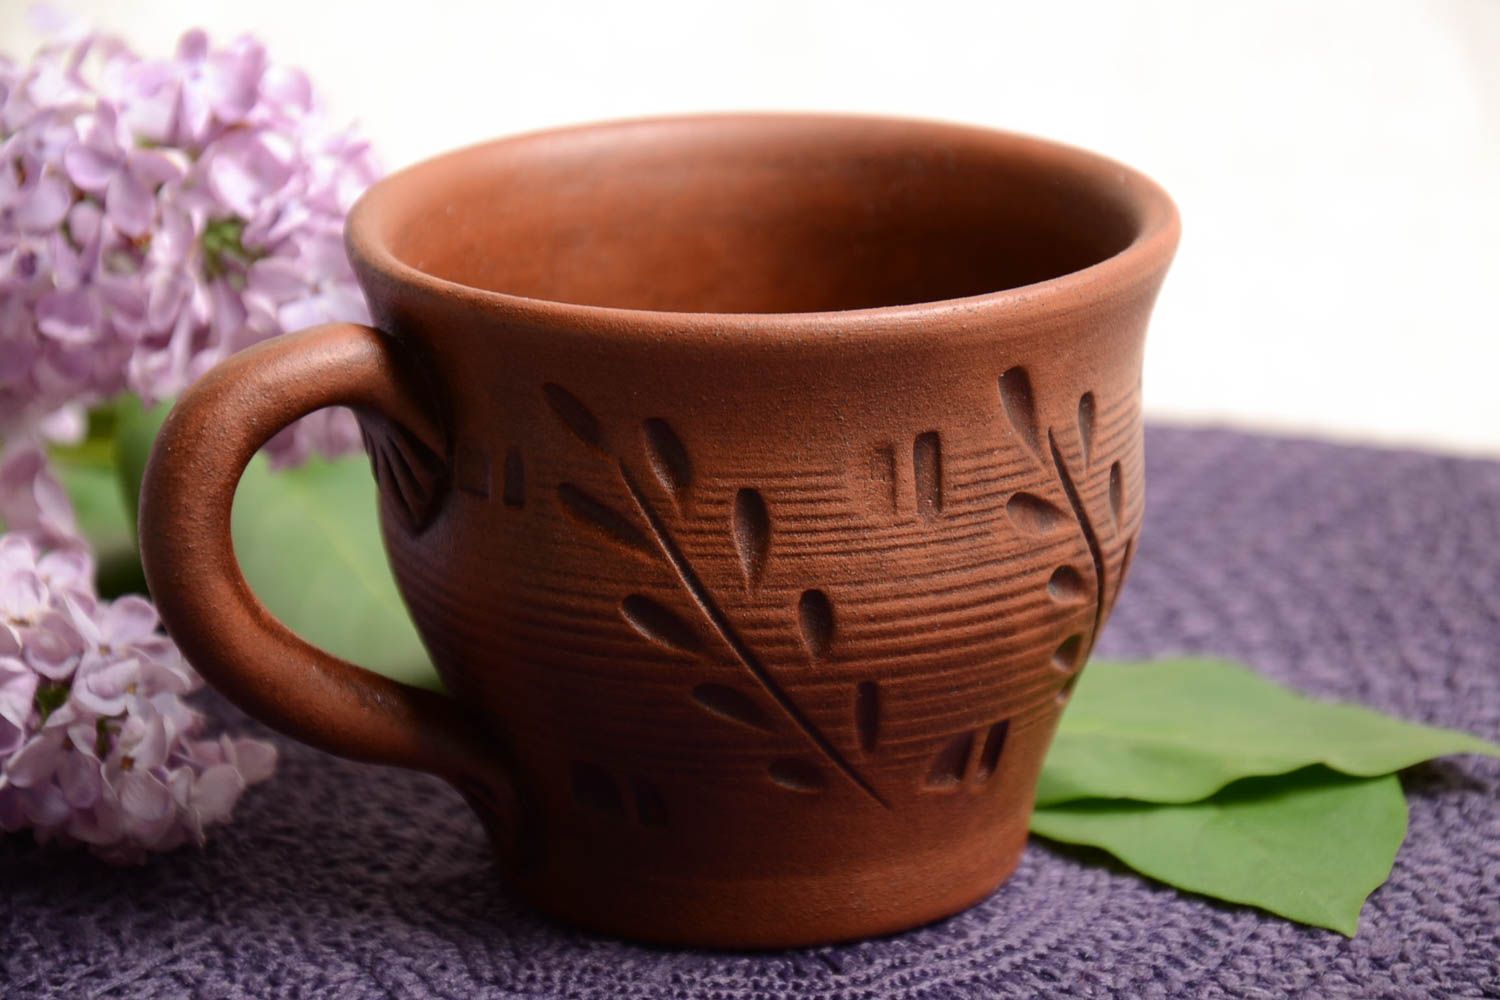 Large 13 oz handmade clay glazed drinking cup with handle and floral pattern in Japanese style photo 1